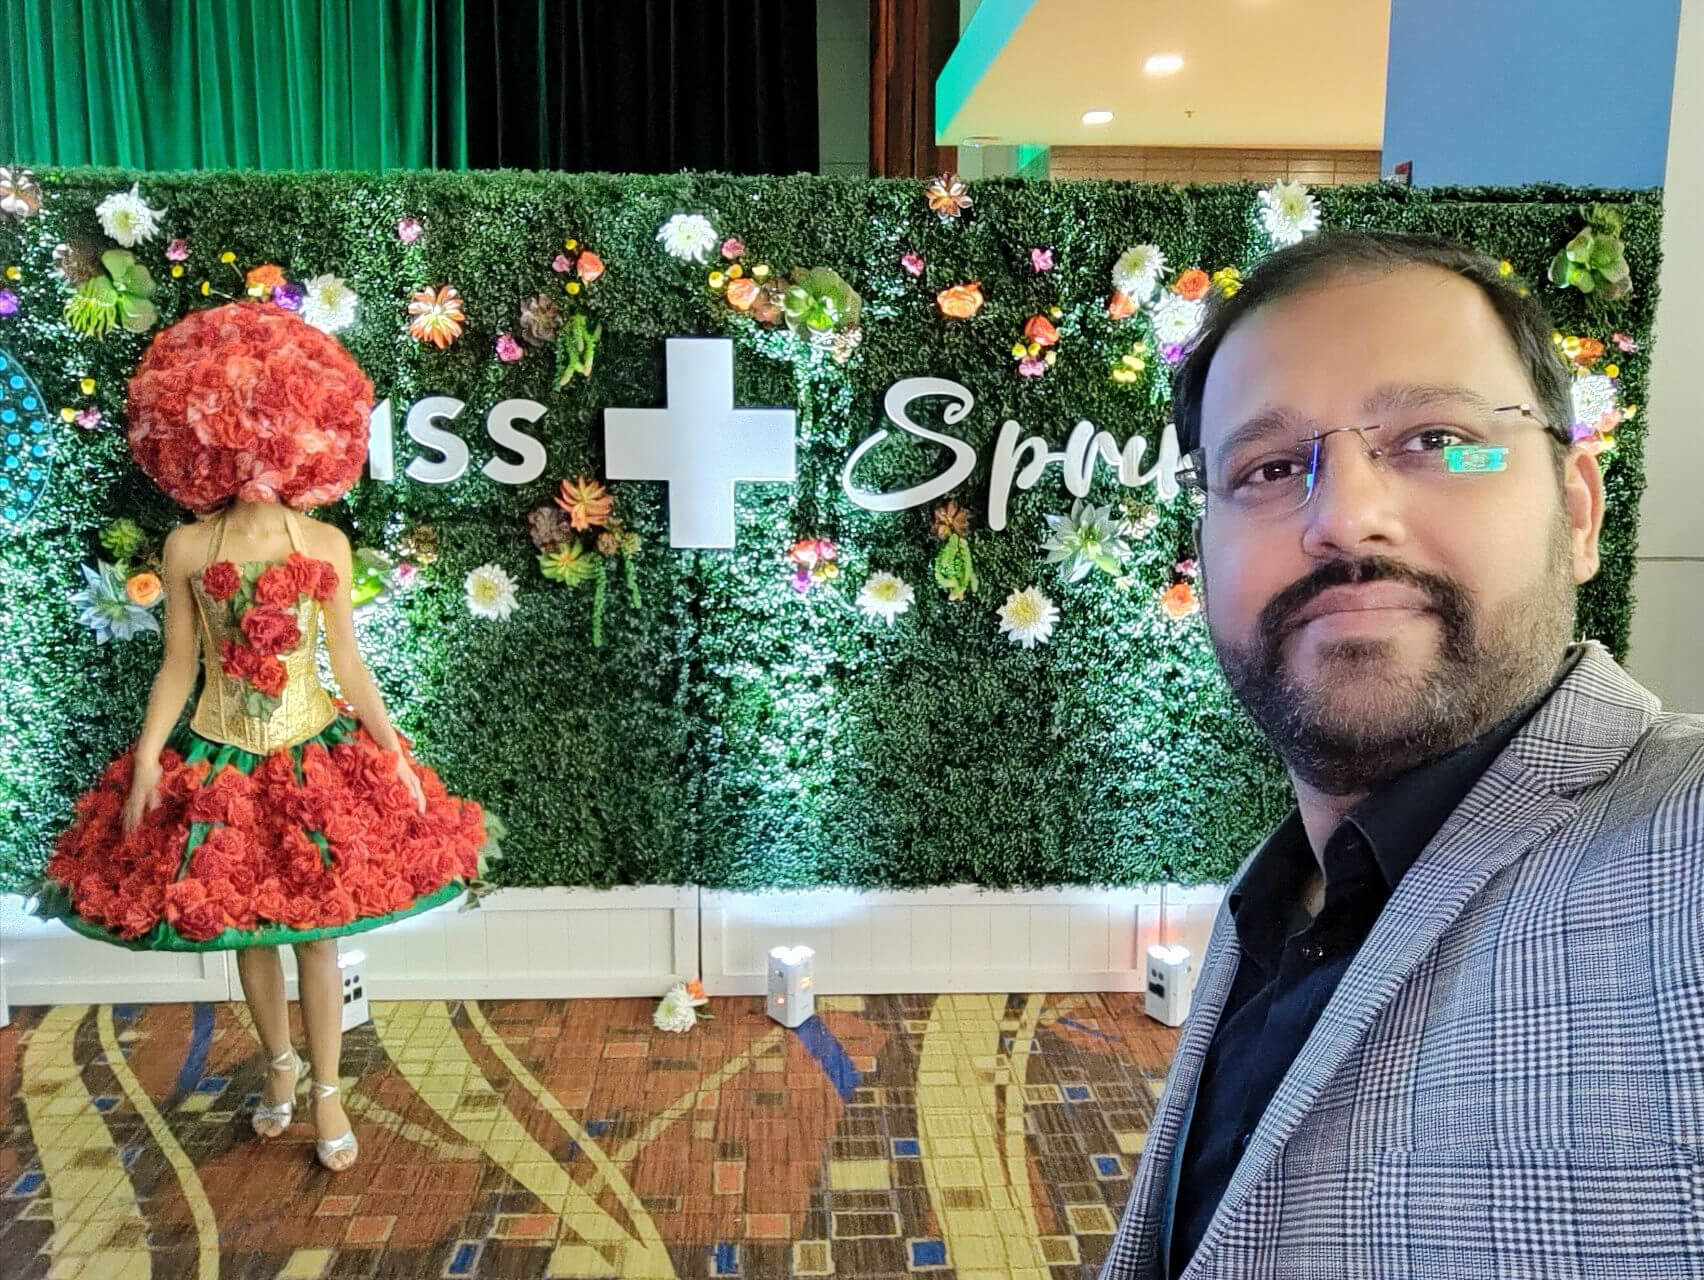 TheHealthcare360 at HIMSS 2023 event in McCormick Place Convention Center, Chicago, IL, USA - #Tejas Deshmukh, #clair360 #HIMSS2023 #Hal Wolf